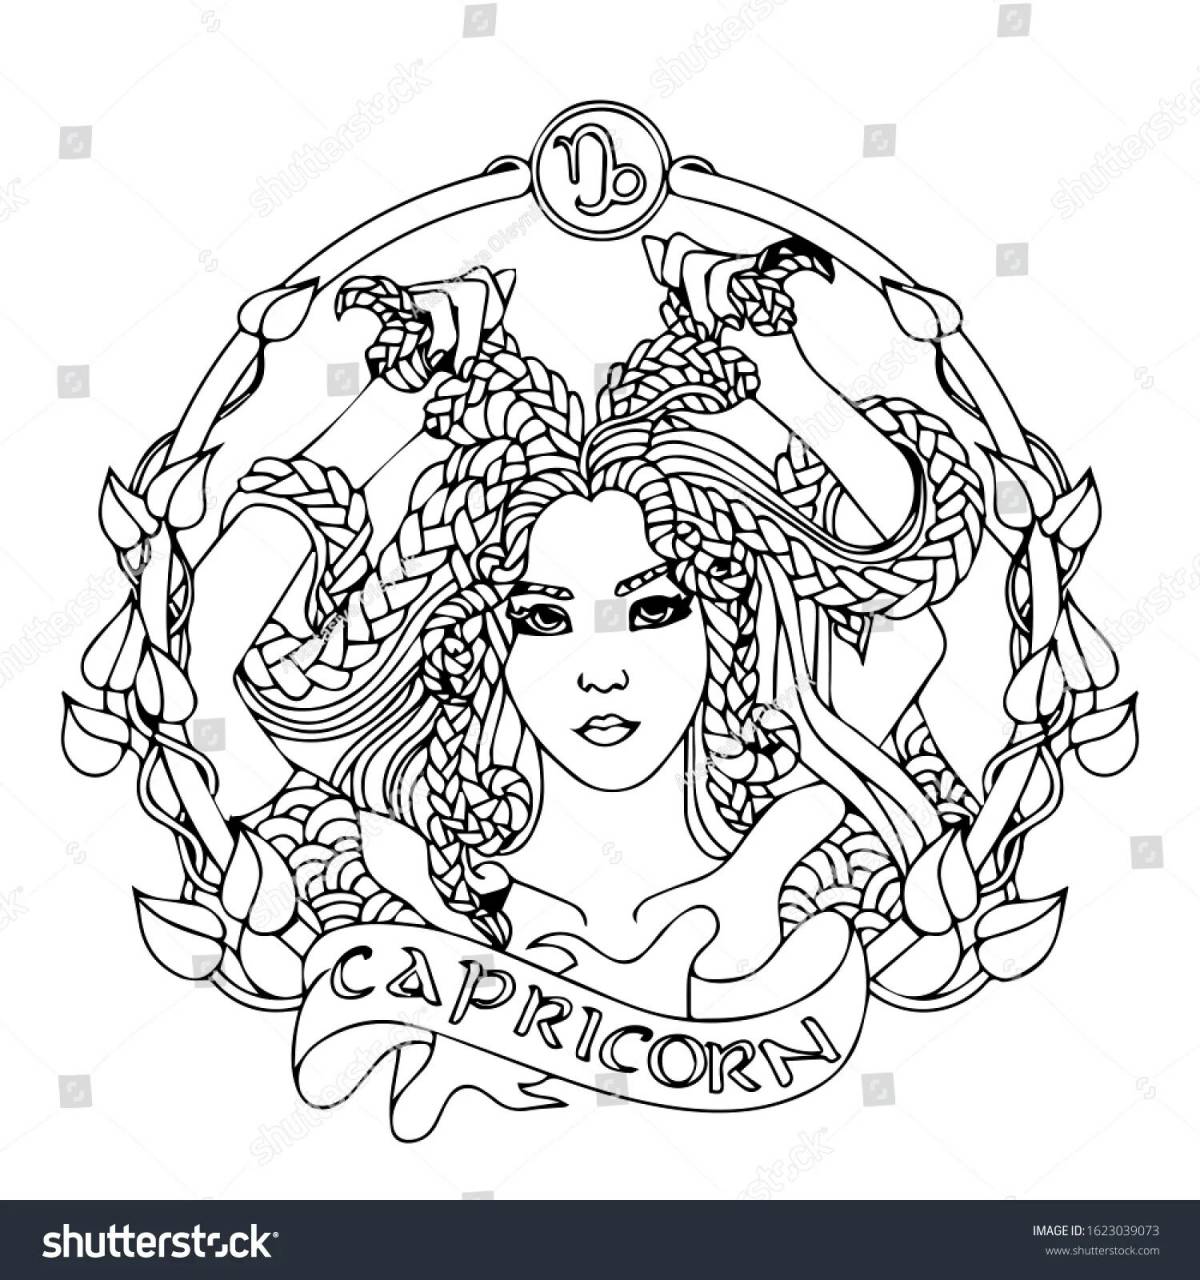 Amazing coloring book antistress signs of the zodiac